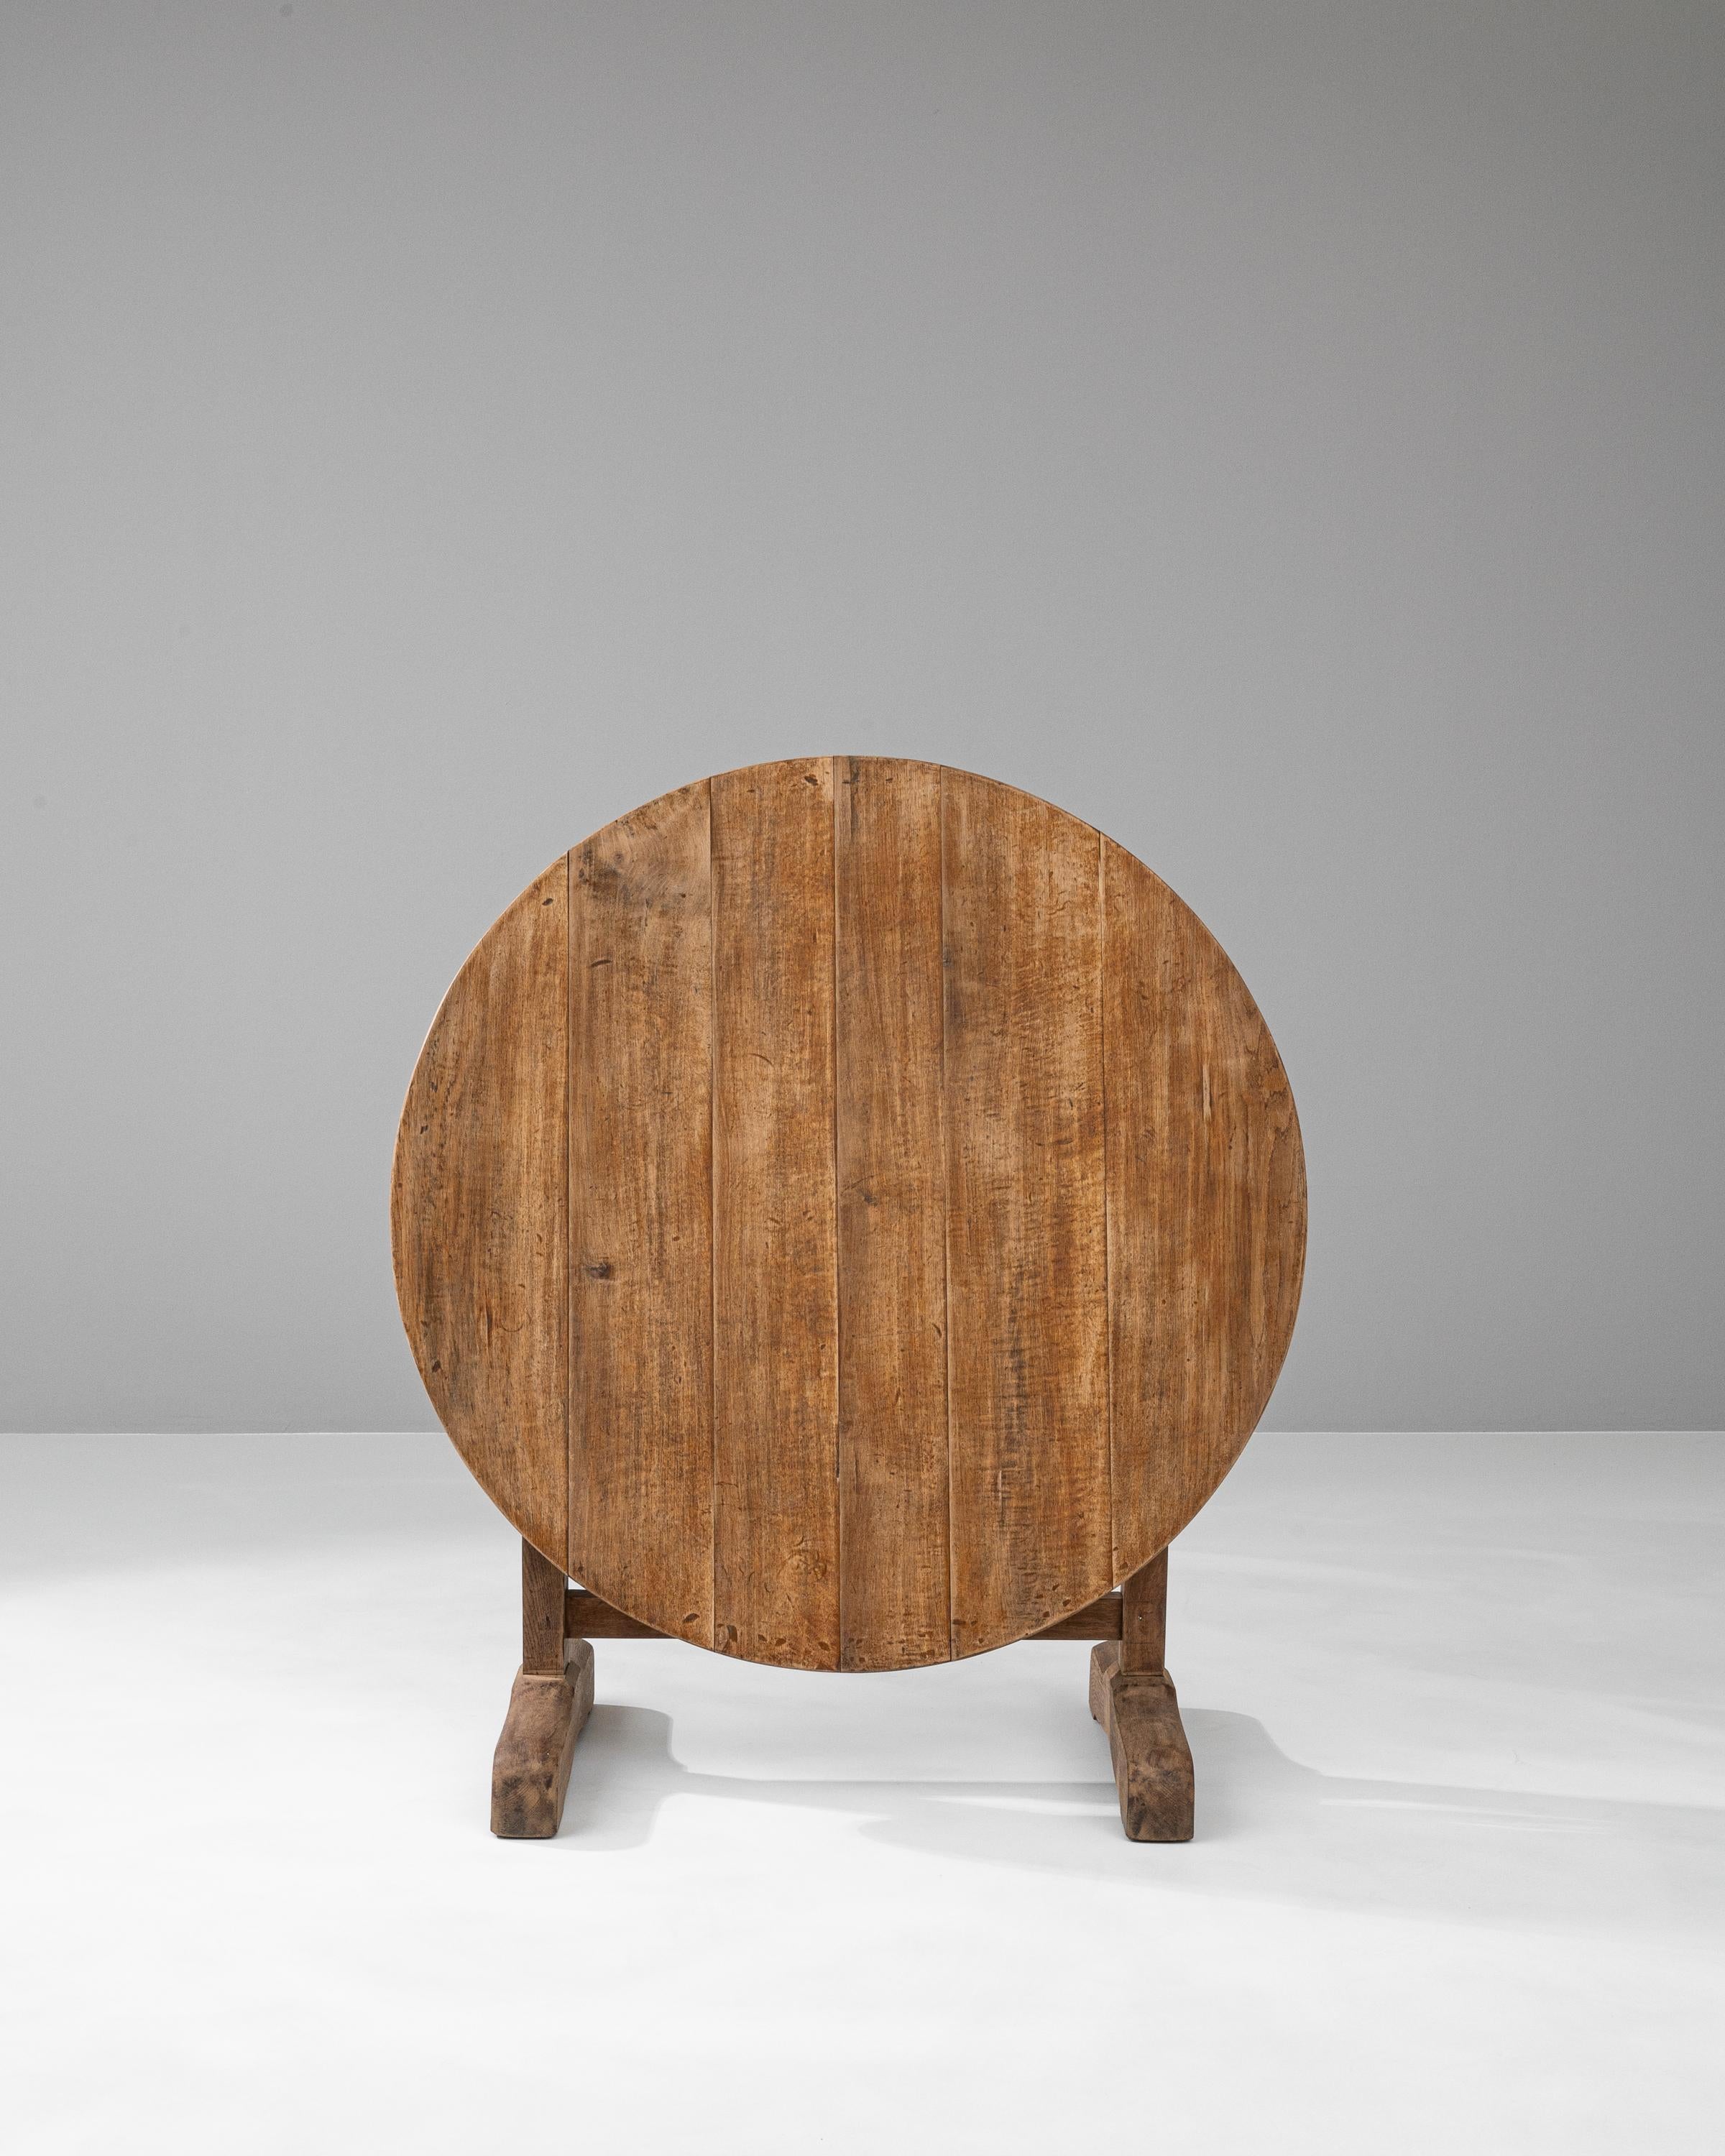 Introducing the exquisite 19th Century French Wooden Wine Tasting Table, a timeless addition to your curated home collection. Imbued with history, this authentic piece was crafted in the era of romantic poets and illustrious artists. Its beautifully